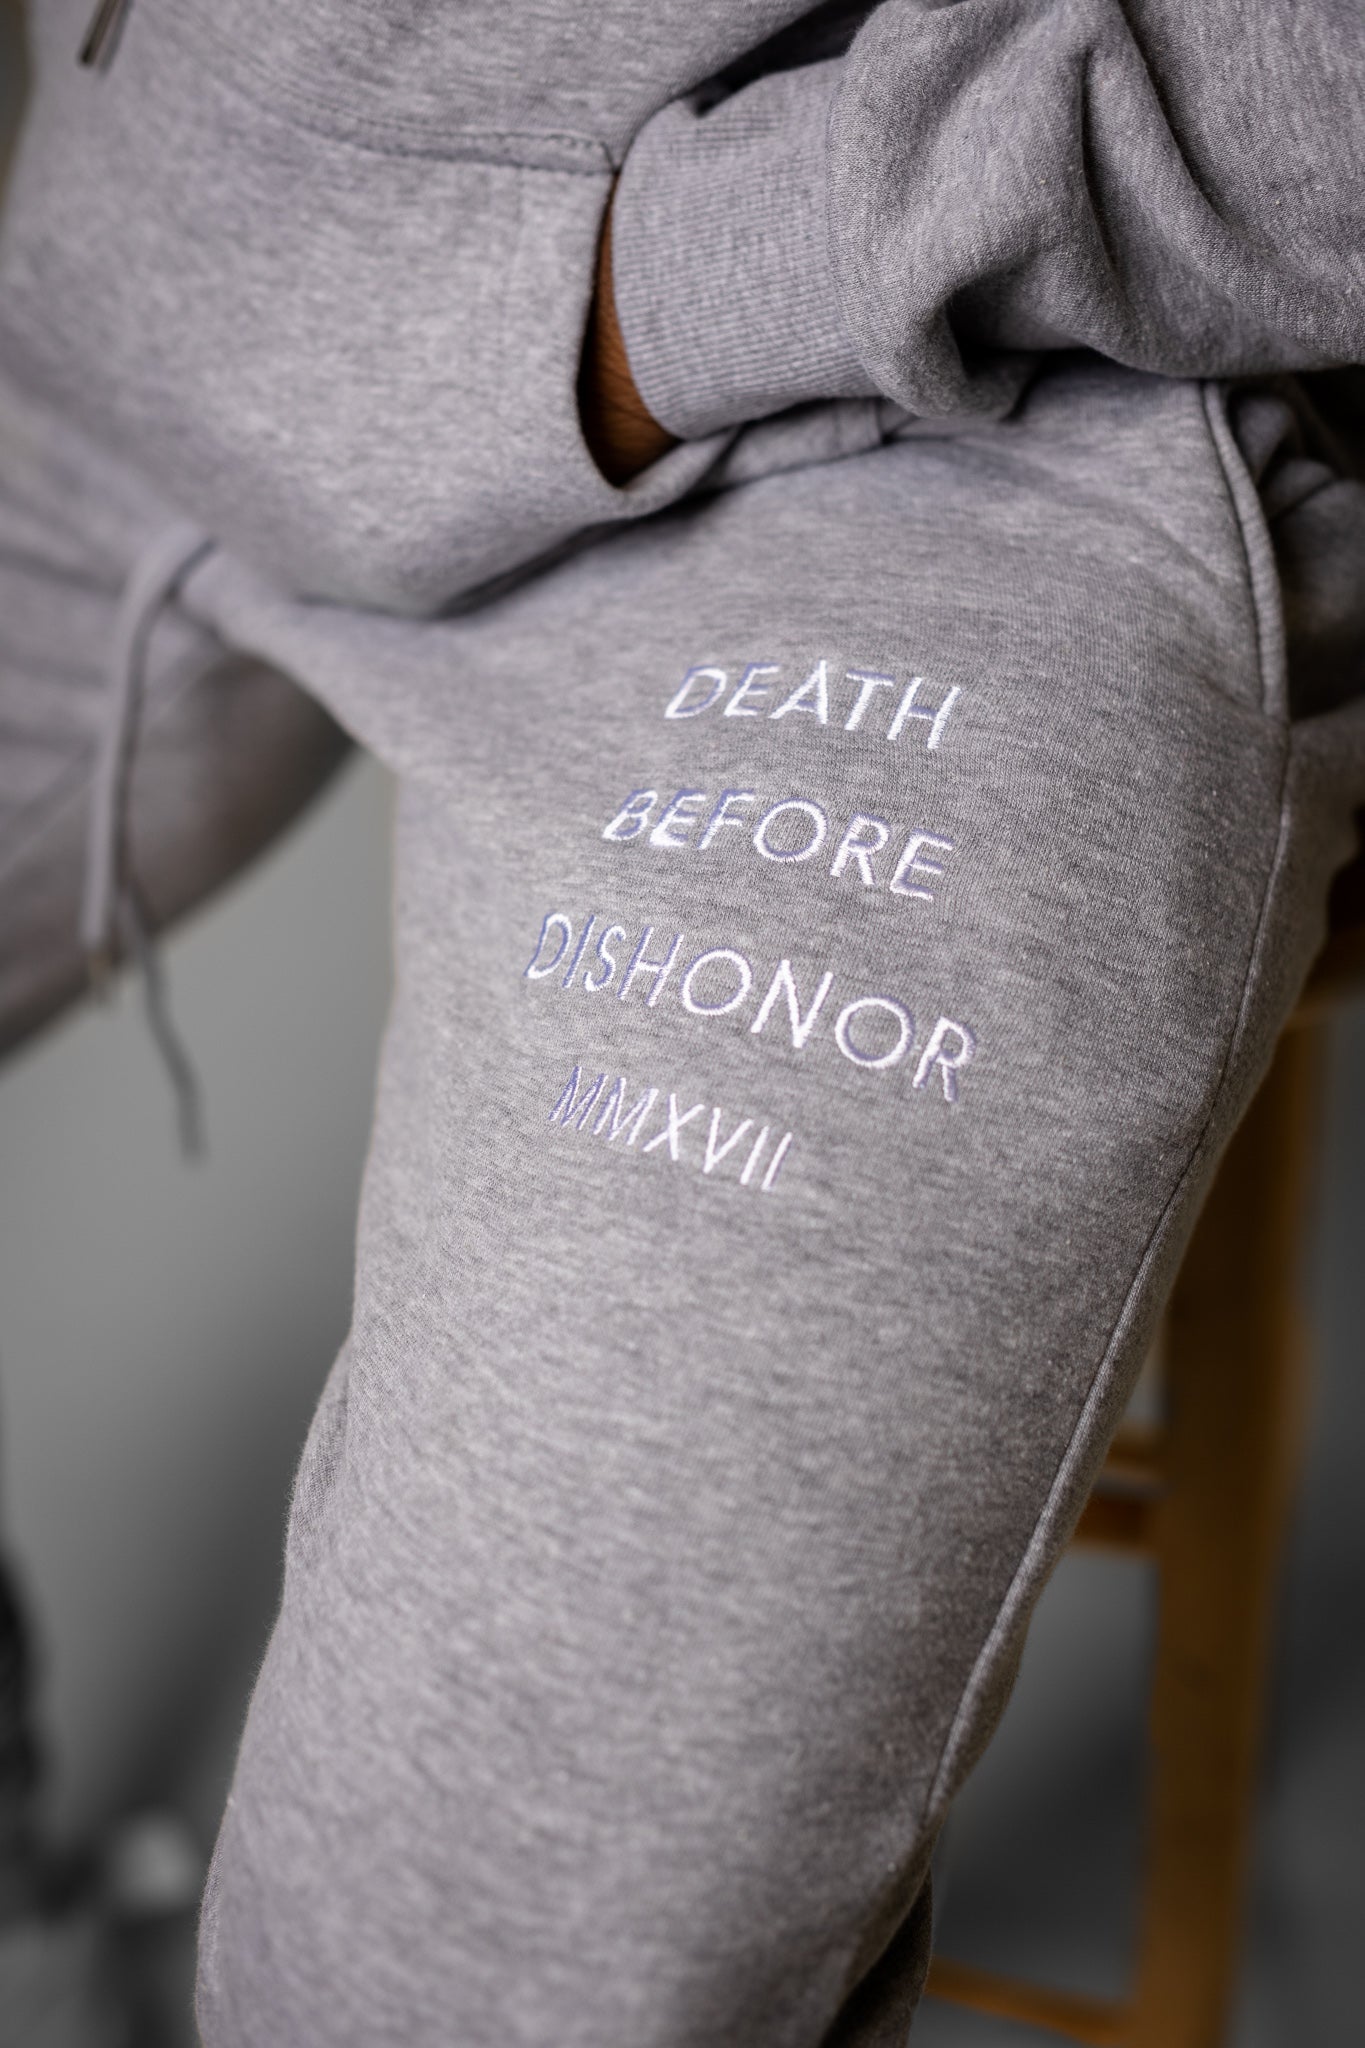 "Death Before Dishonor" (Stone)